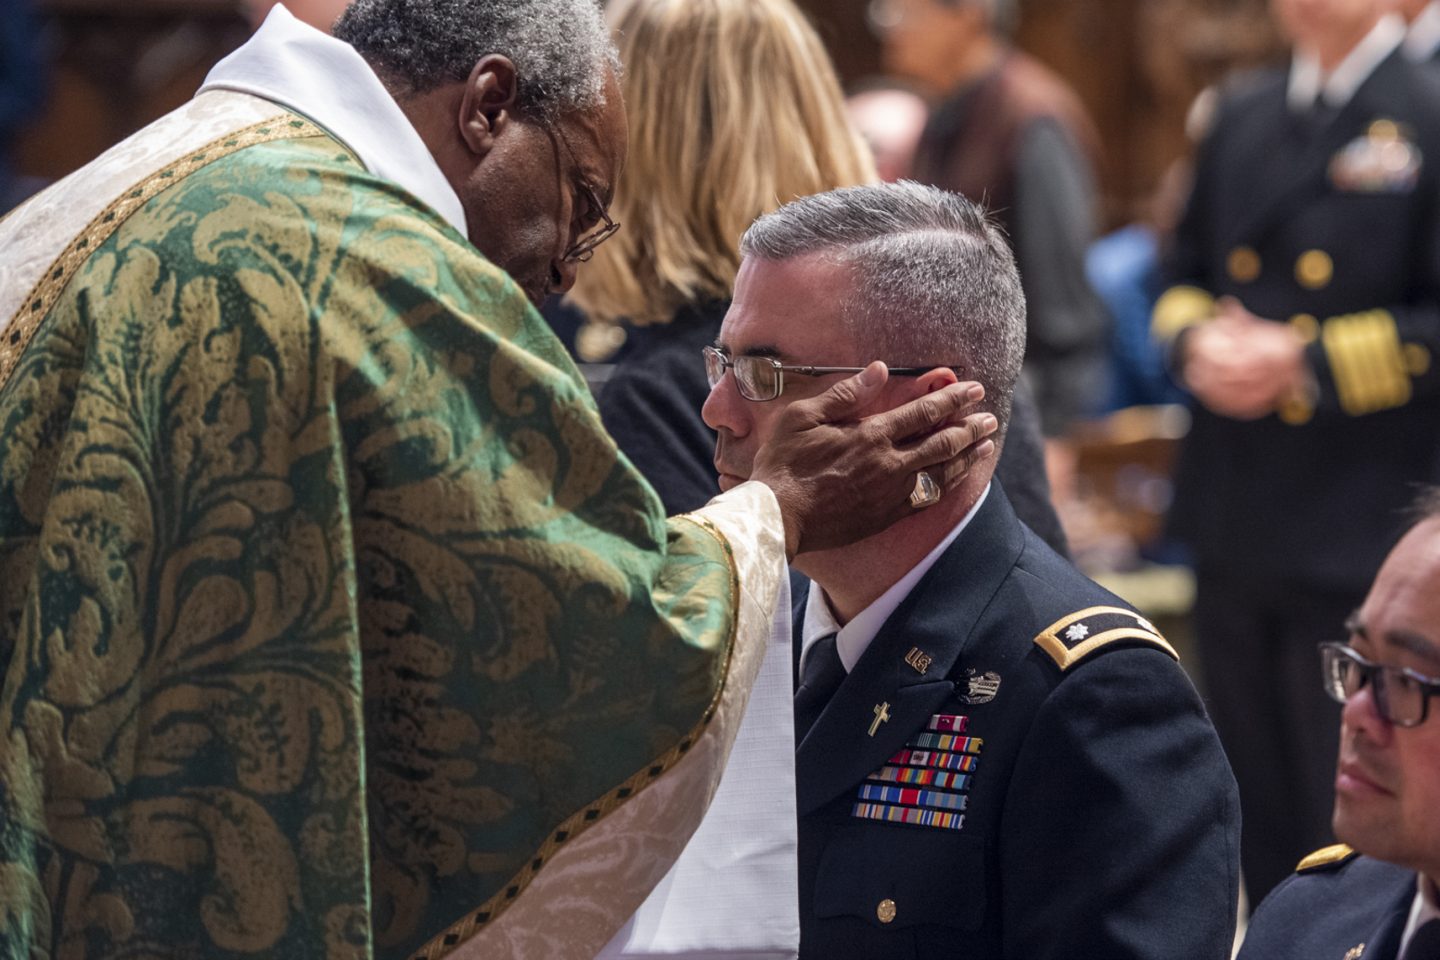 Bishop and military with other worshippers in the background during service